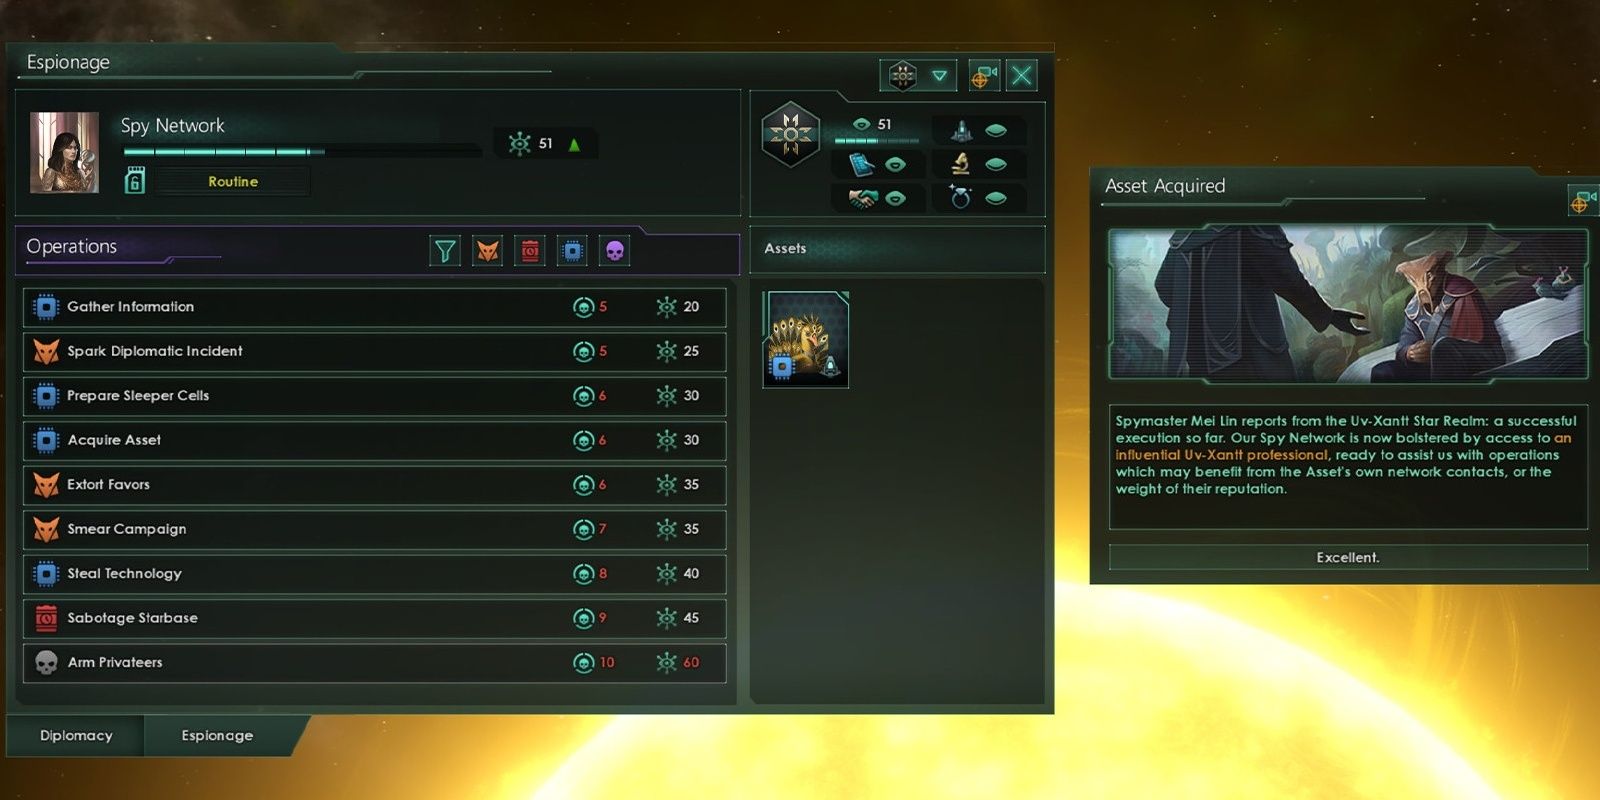 Stellaris List Of Operations To Acquire Assets For Espionage